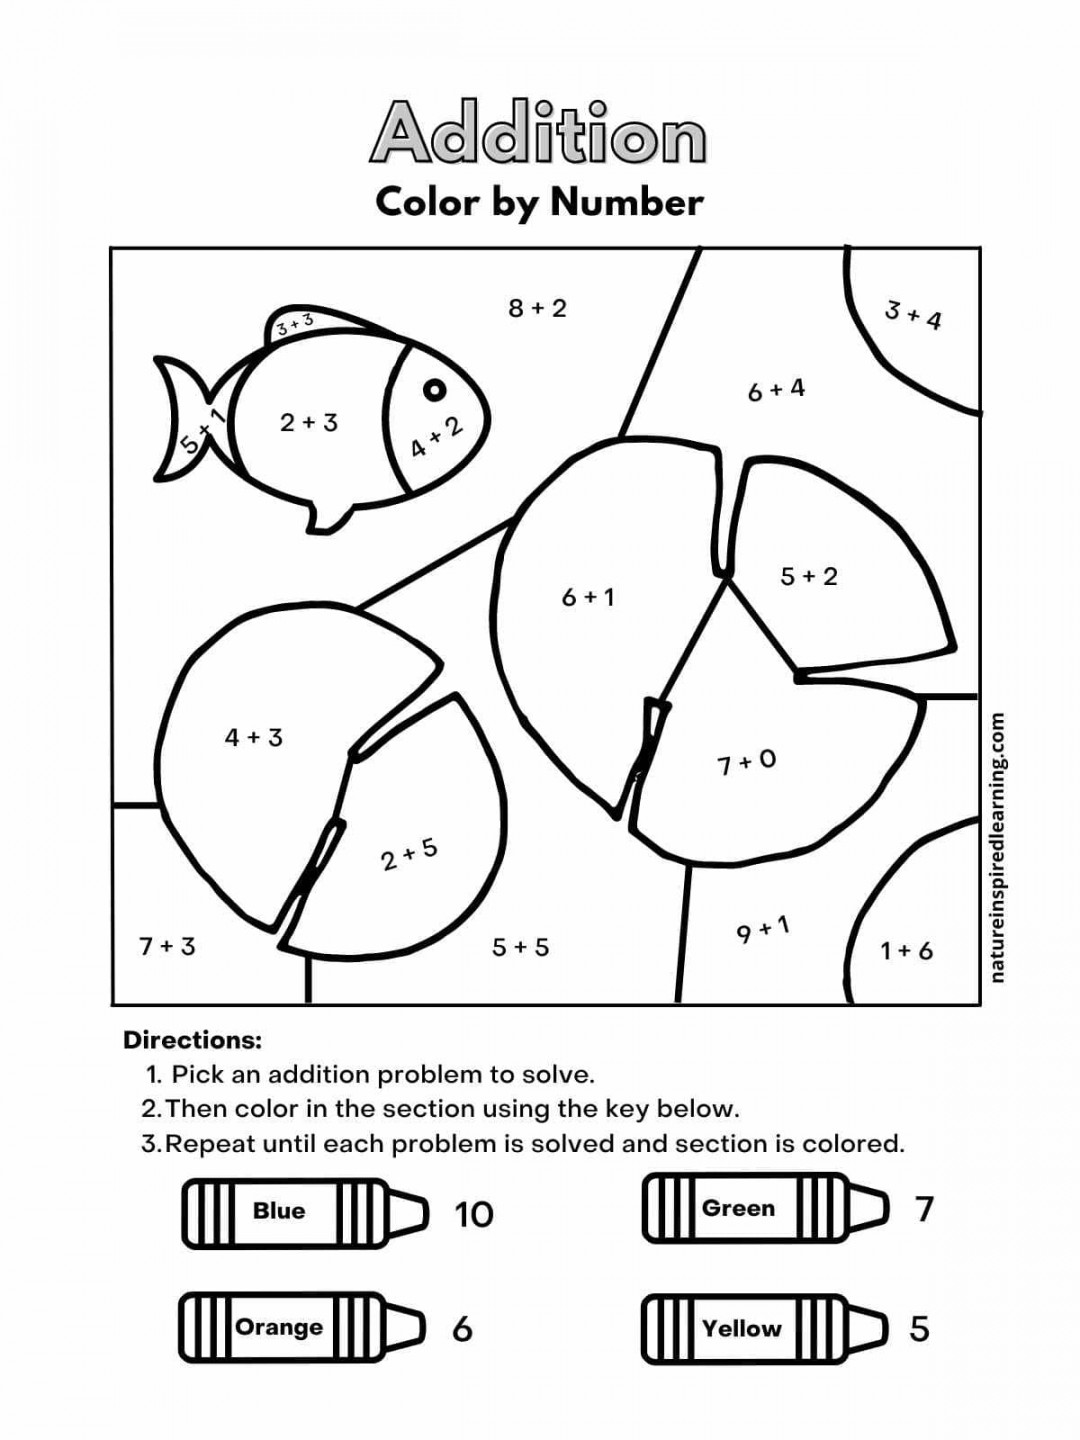 Addition Color by Number Worksheets - Nature Inspired Learning